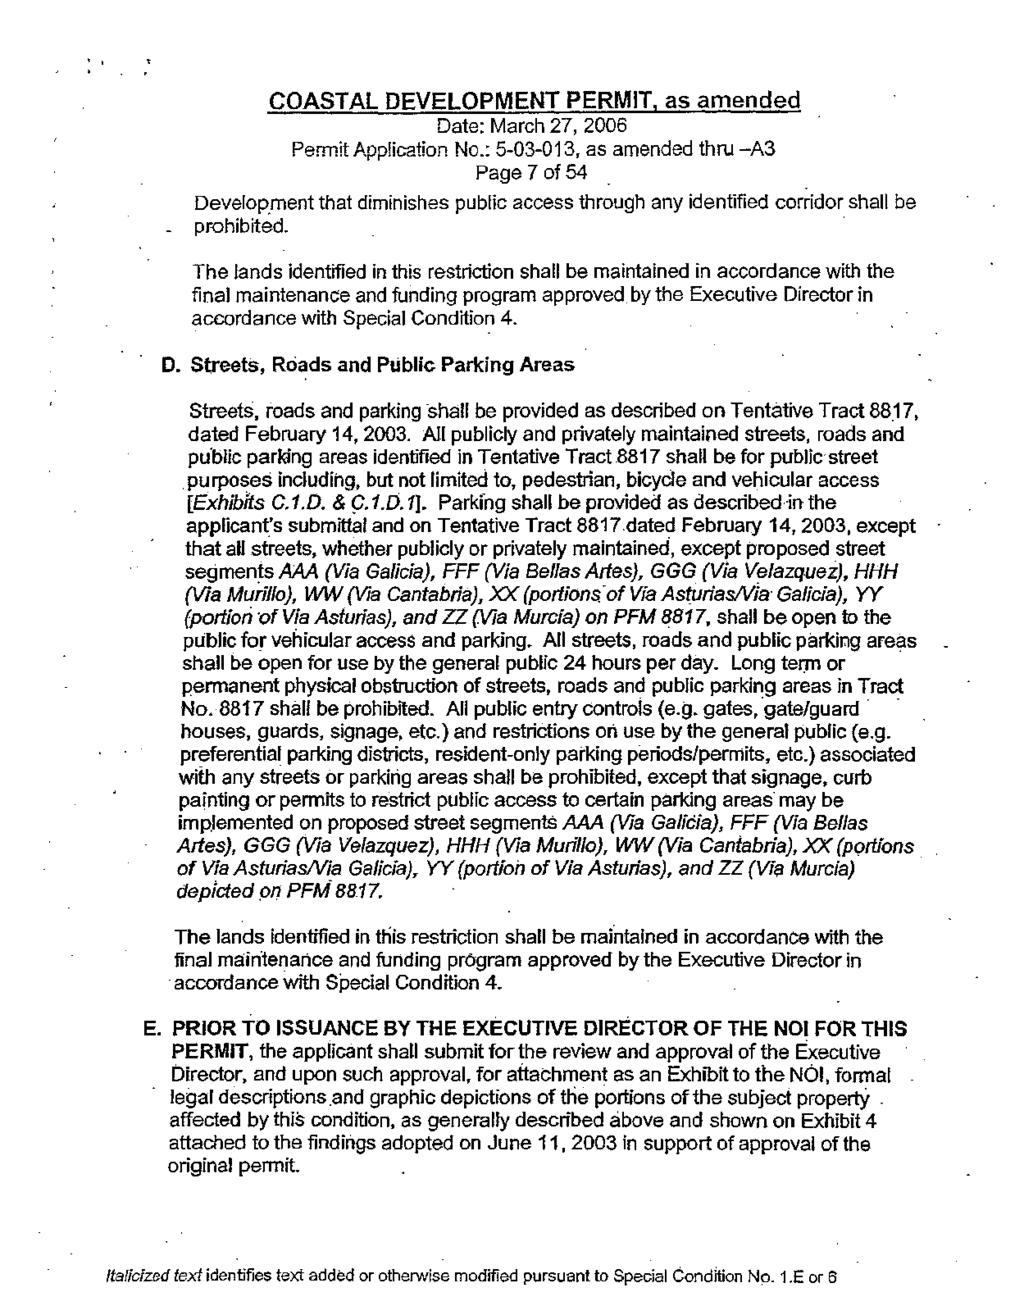 ,, _ COASTAL DEVELOPMENT PERMIT, as amended Date: March 27,2006 Permit Application No.: 5-03-013, as amended thru -A3 Page 7 of 54. Develop.